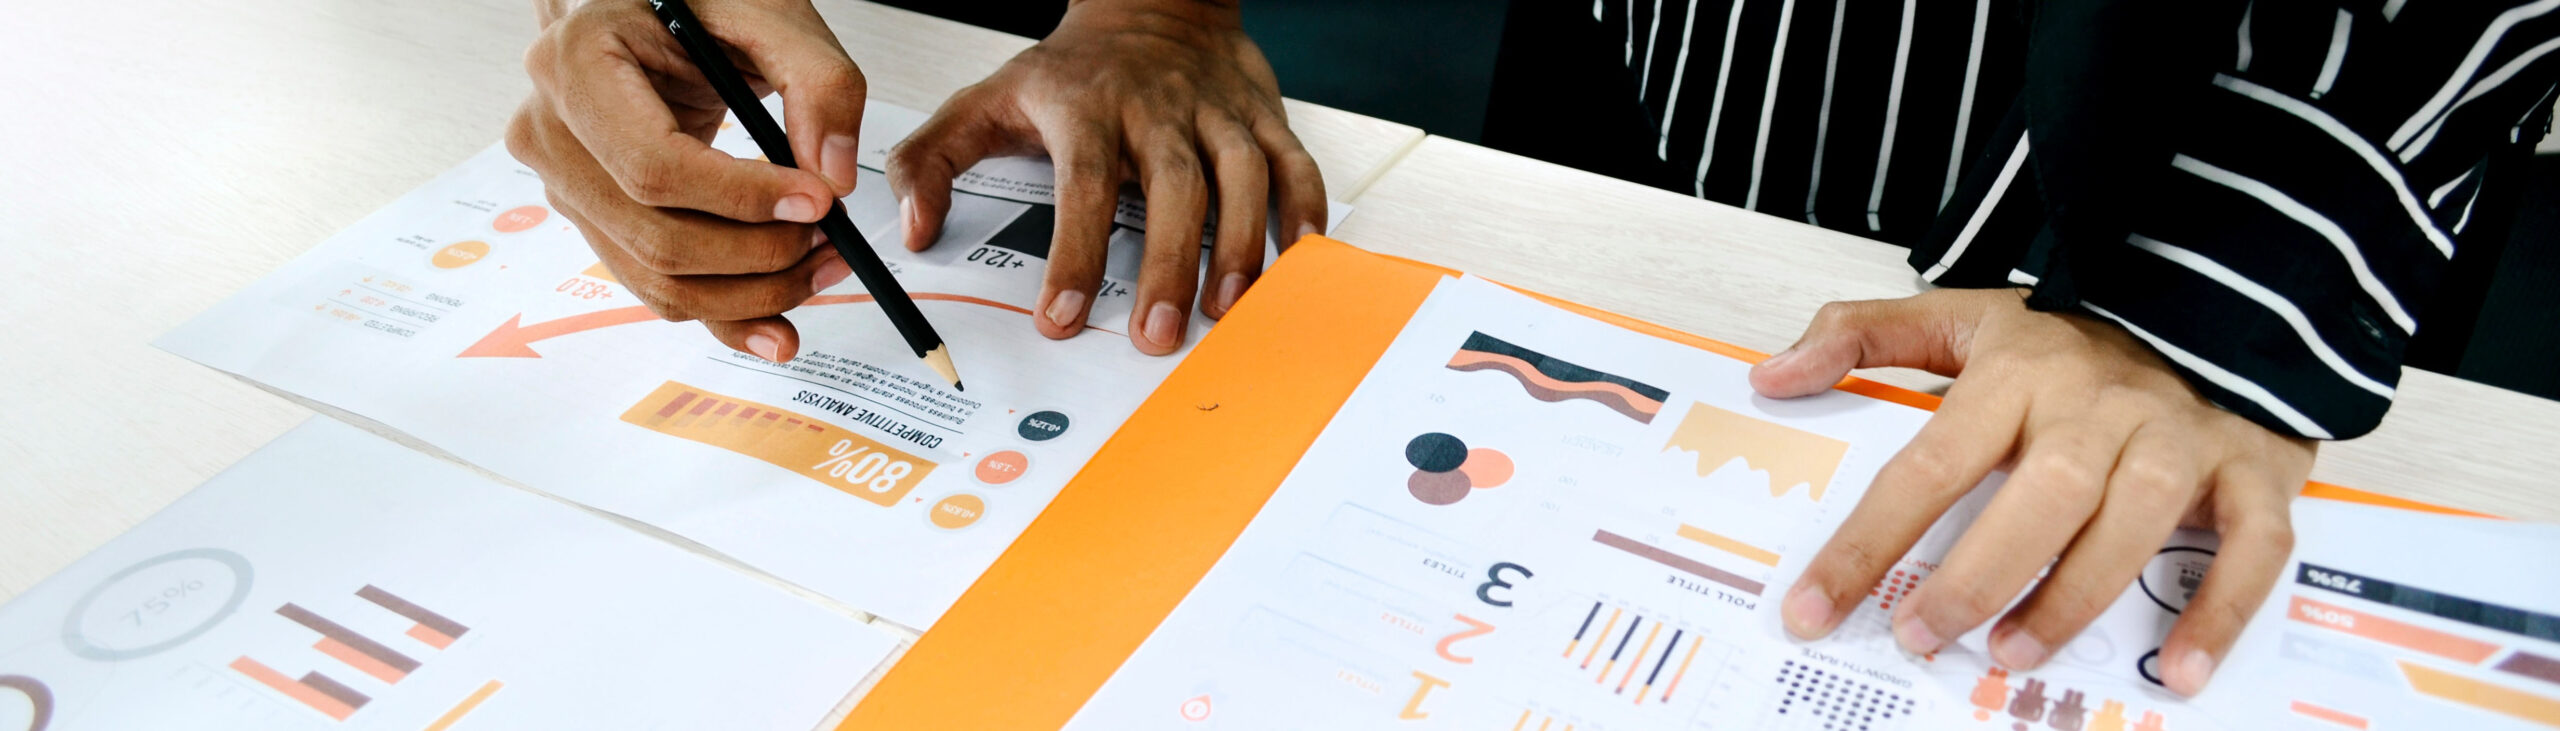 one person holding a pencil marking some printed graphs on paper, alongside another person.